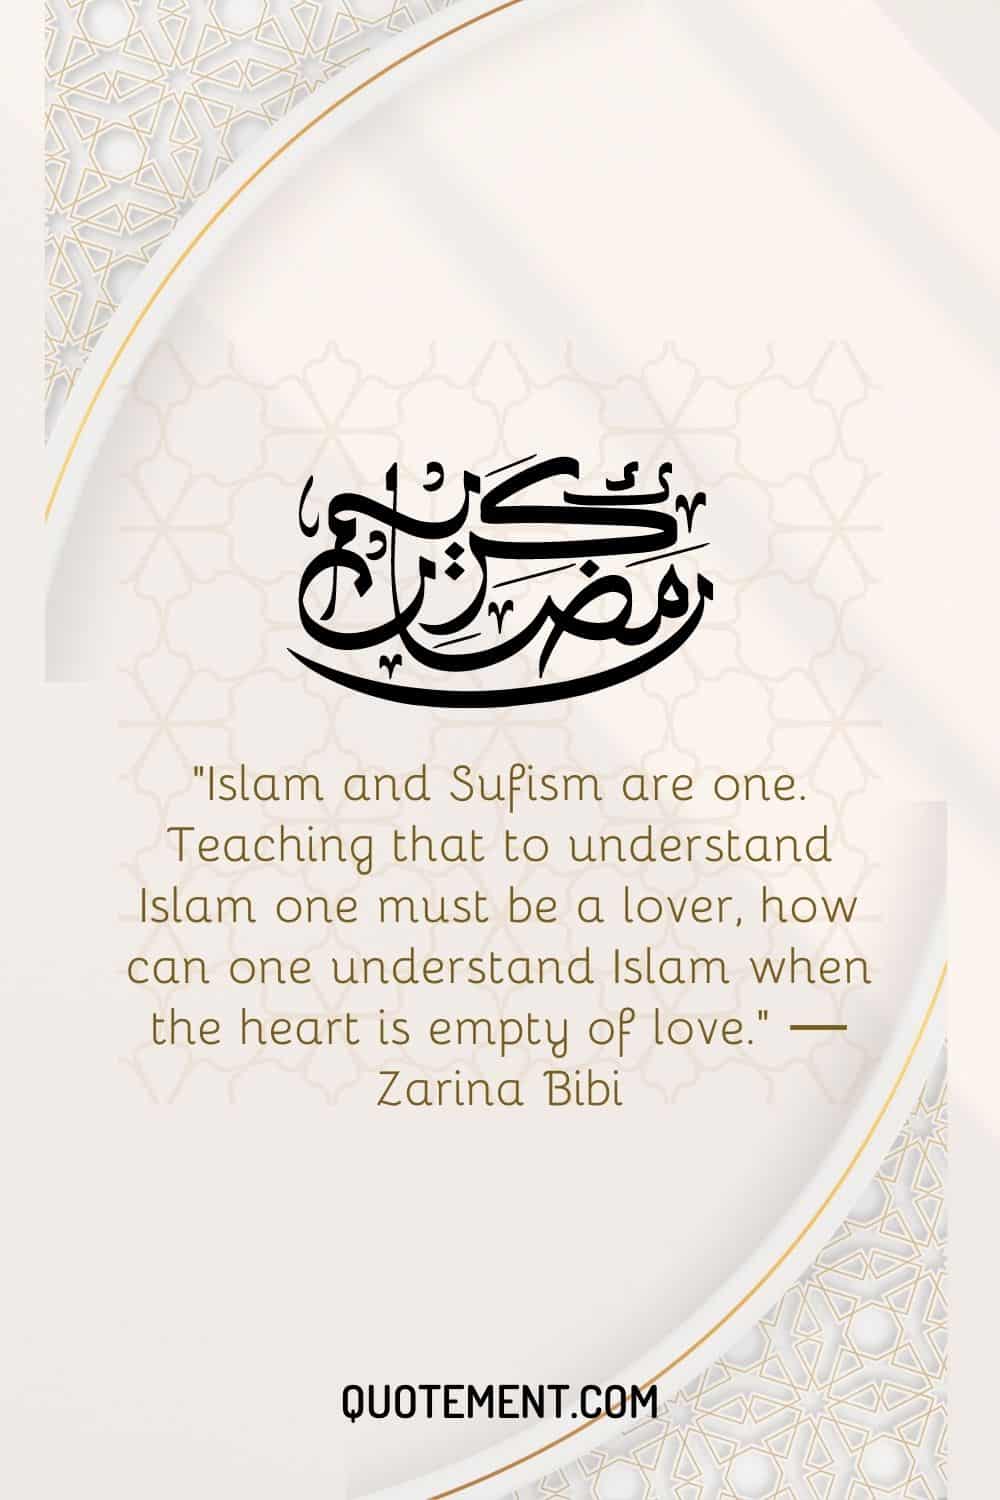 Islam and Sufism are one. Teaching that to understand Islam one must be a lover, how can one understand Islam when the heart is empty of love